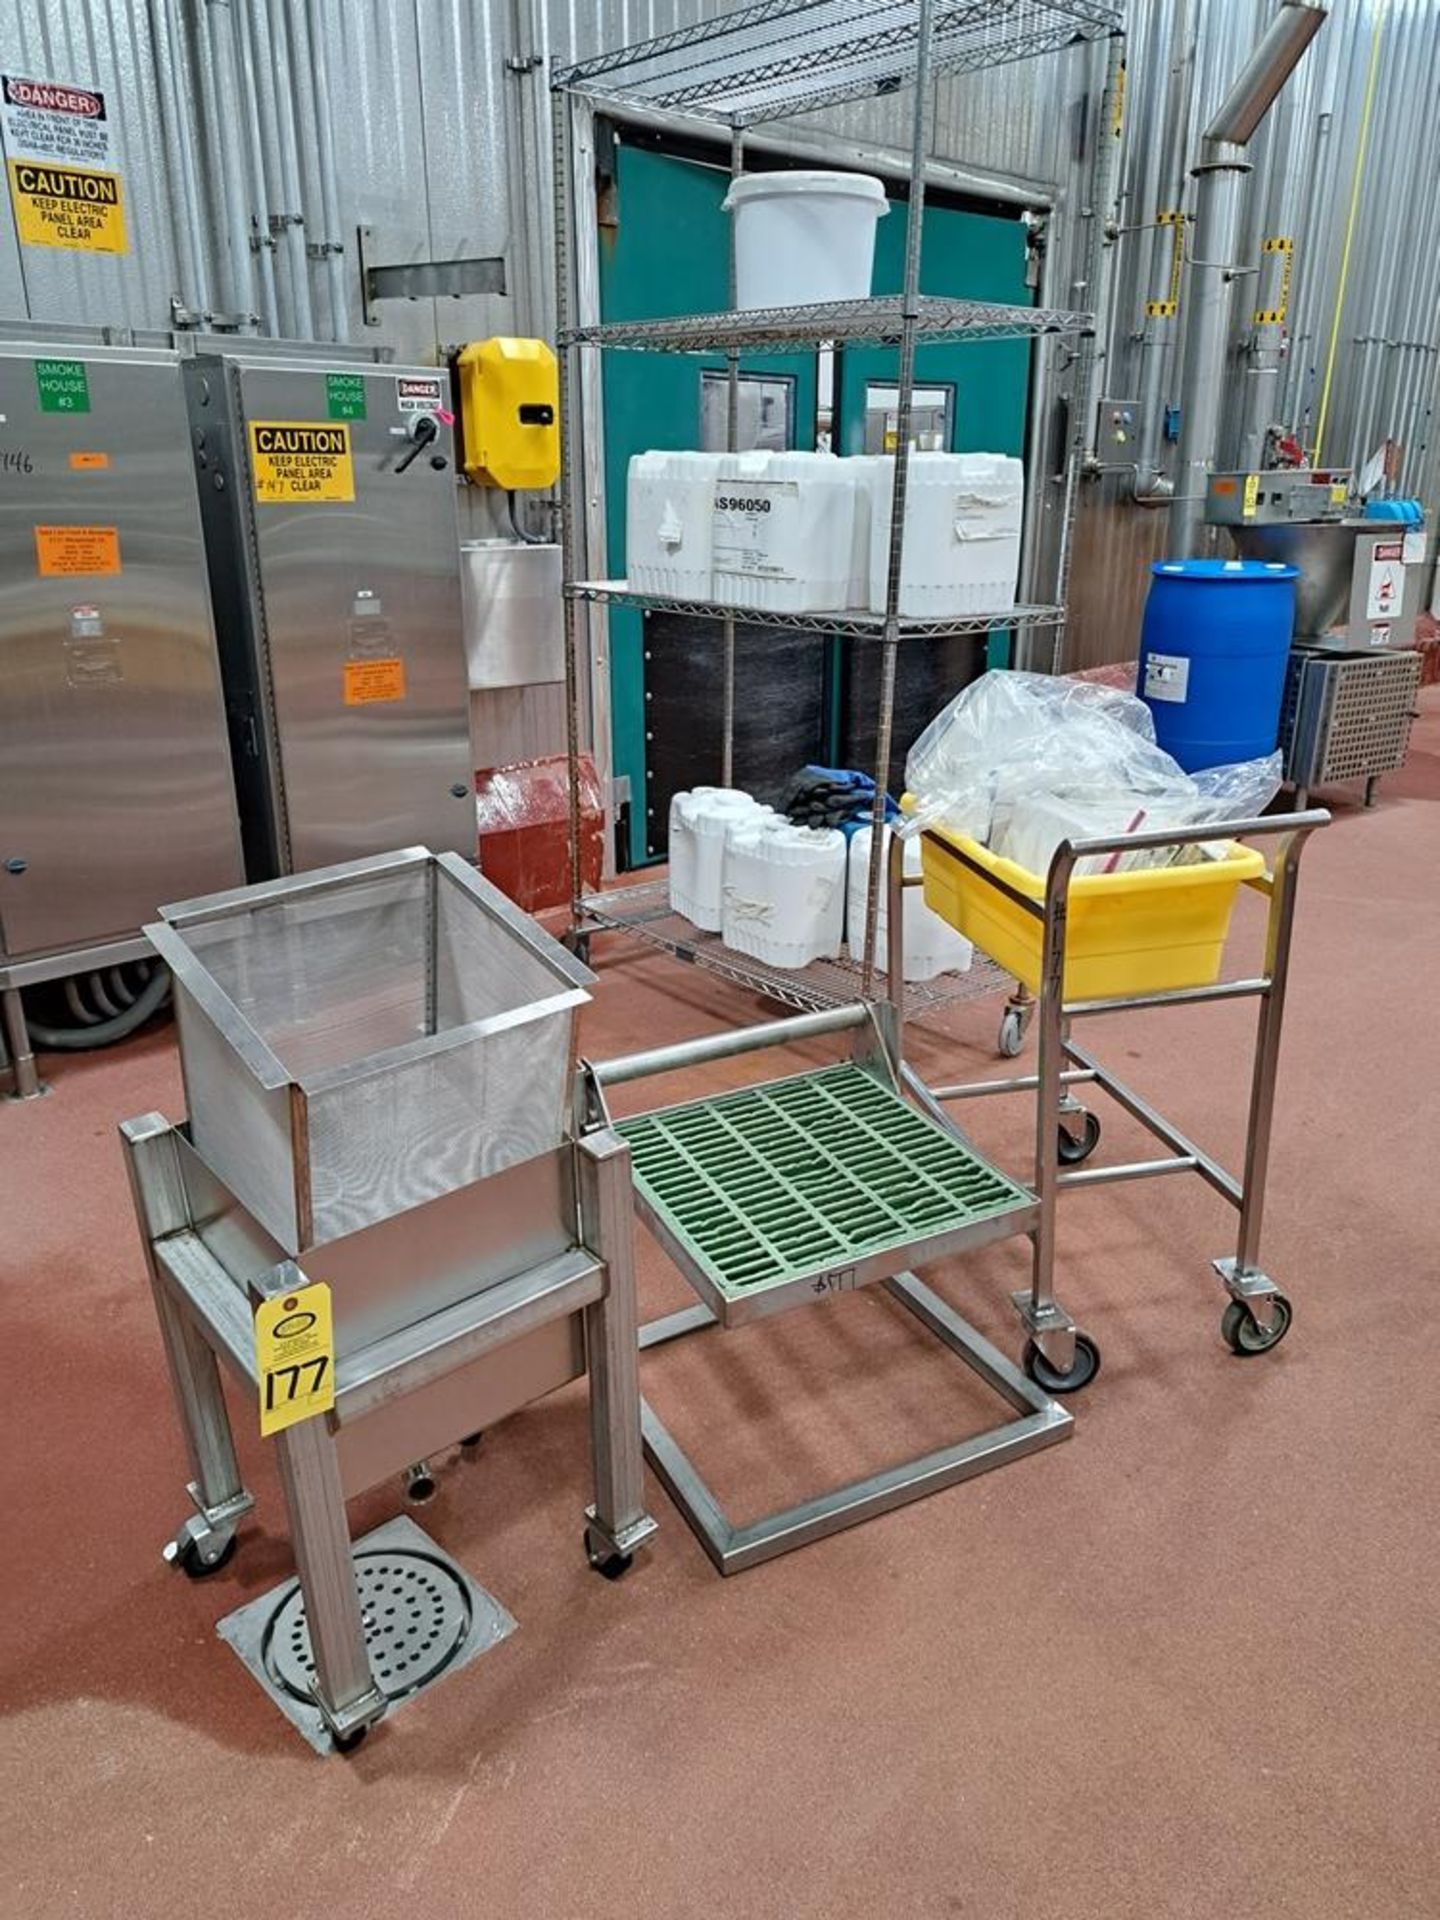 Lot (1) Stainless Steel Tote Rack, (1) Adjustable Work Platform, (1) Portable Tank with screen, (